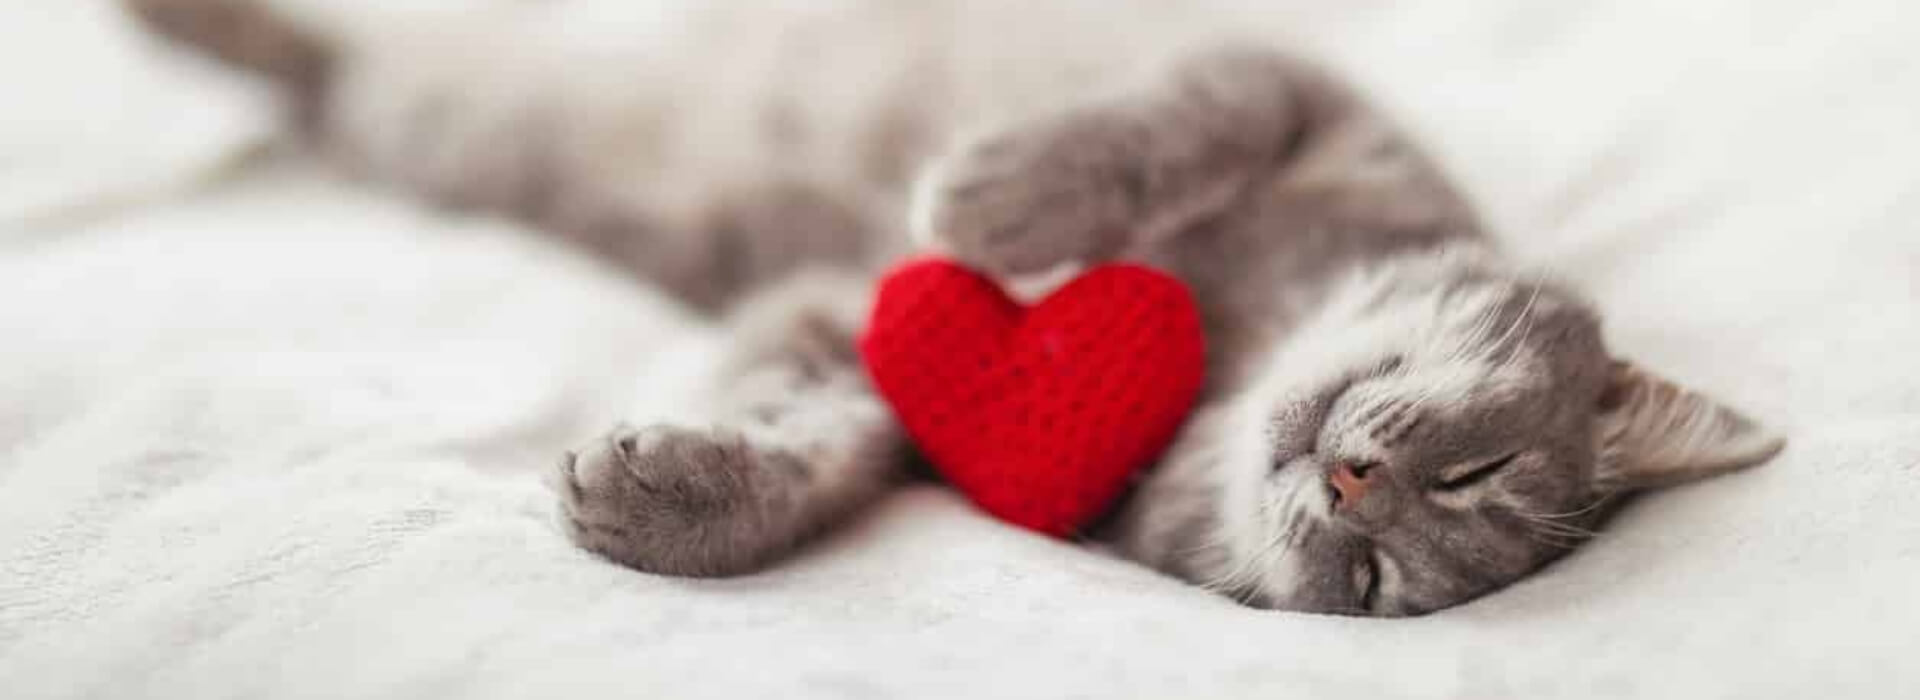 An image of a cat with a read heart shaped today